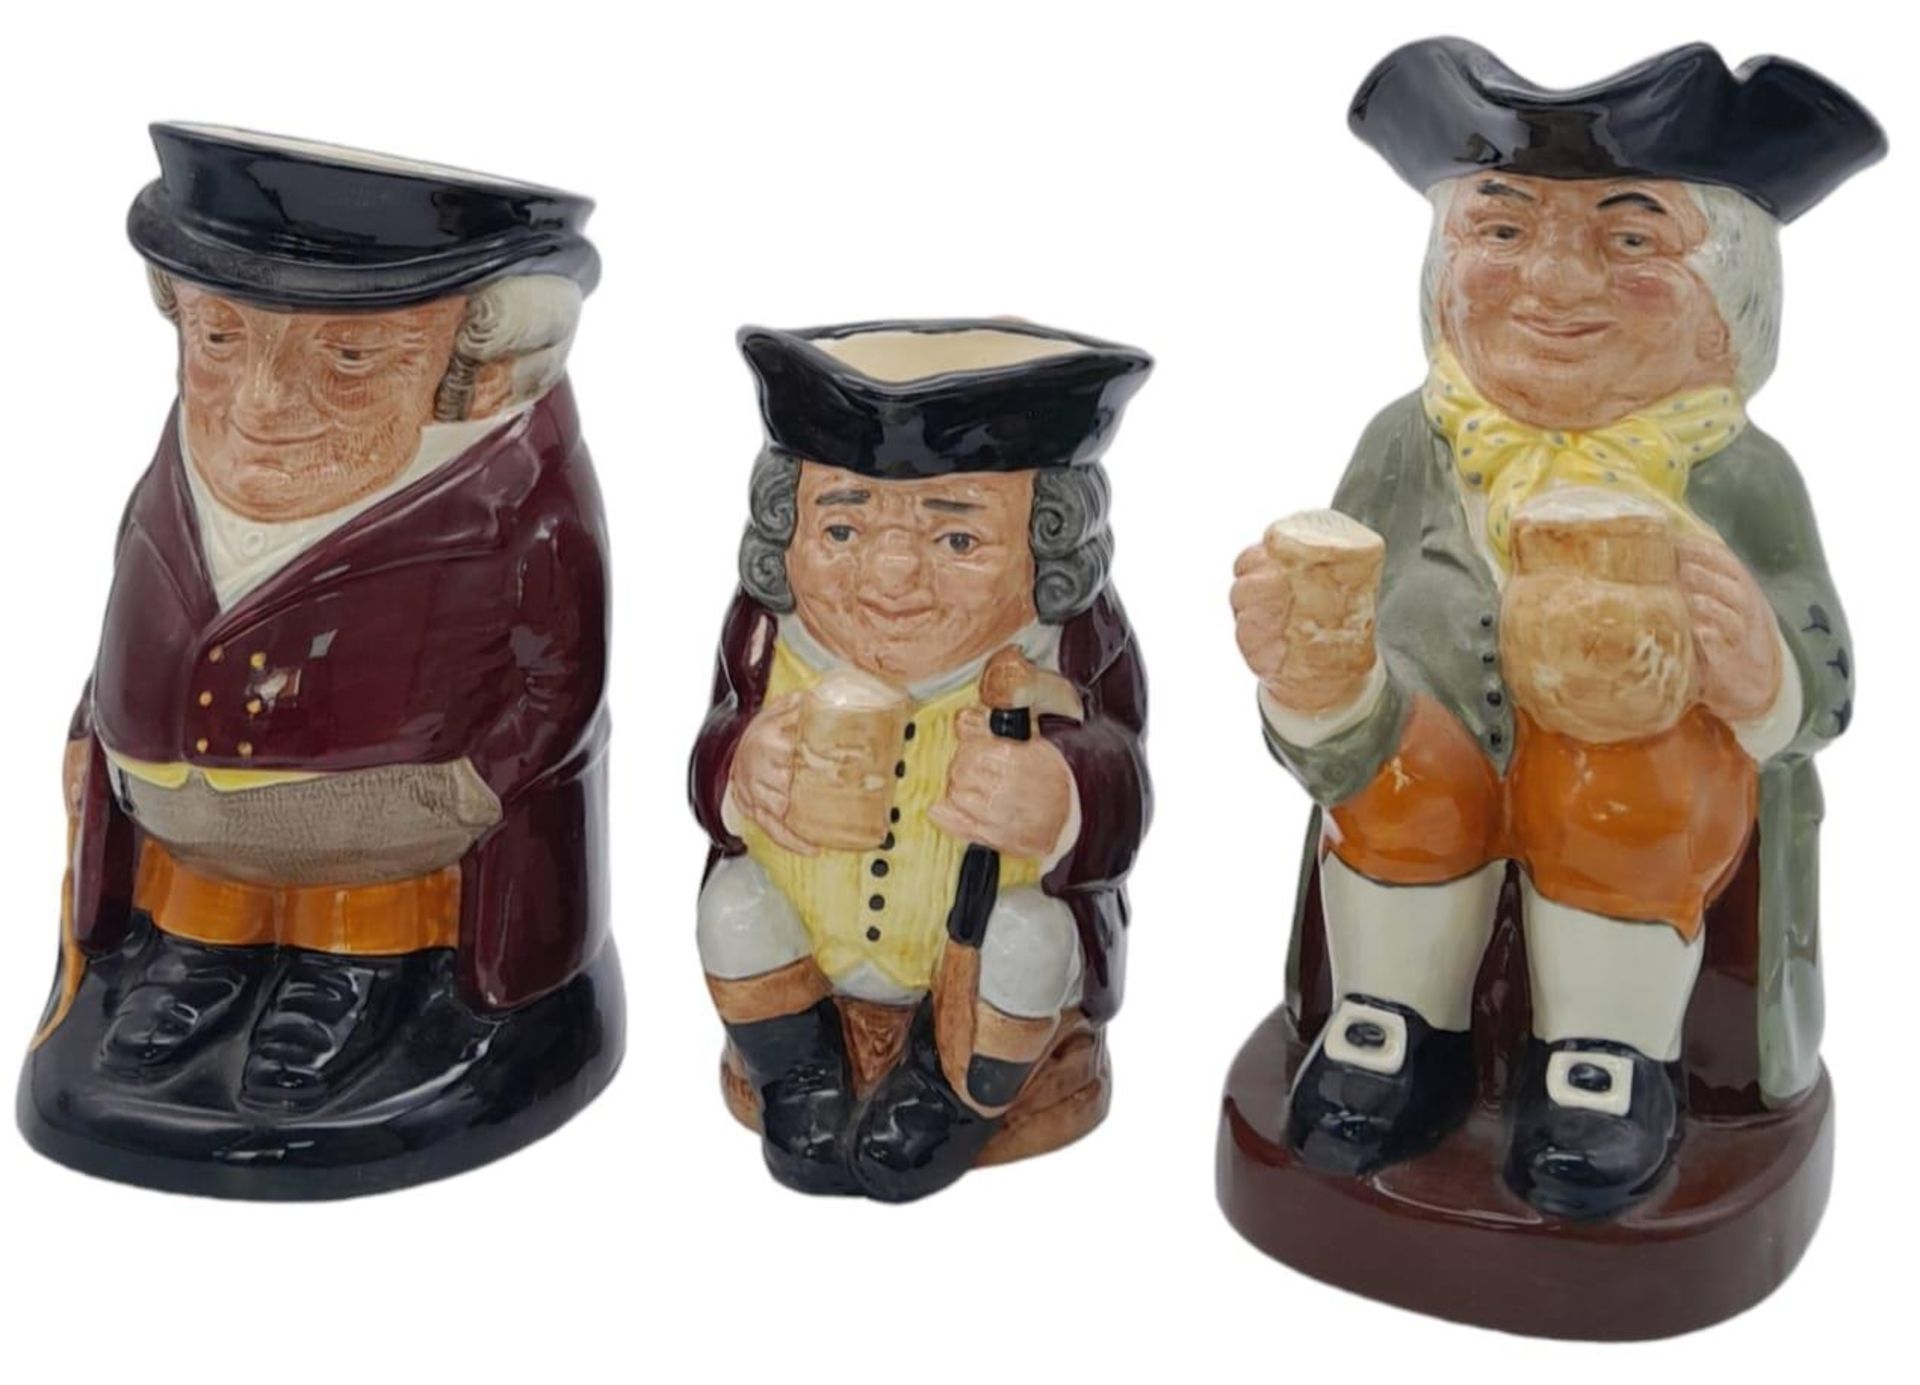 3 TRADITIONAL TOBY JUGS BY ROYAL DOULTON , JOLLY TOBY (16cms) . THE HUNTSMAN (19.5cms) AND HAPPY